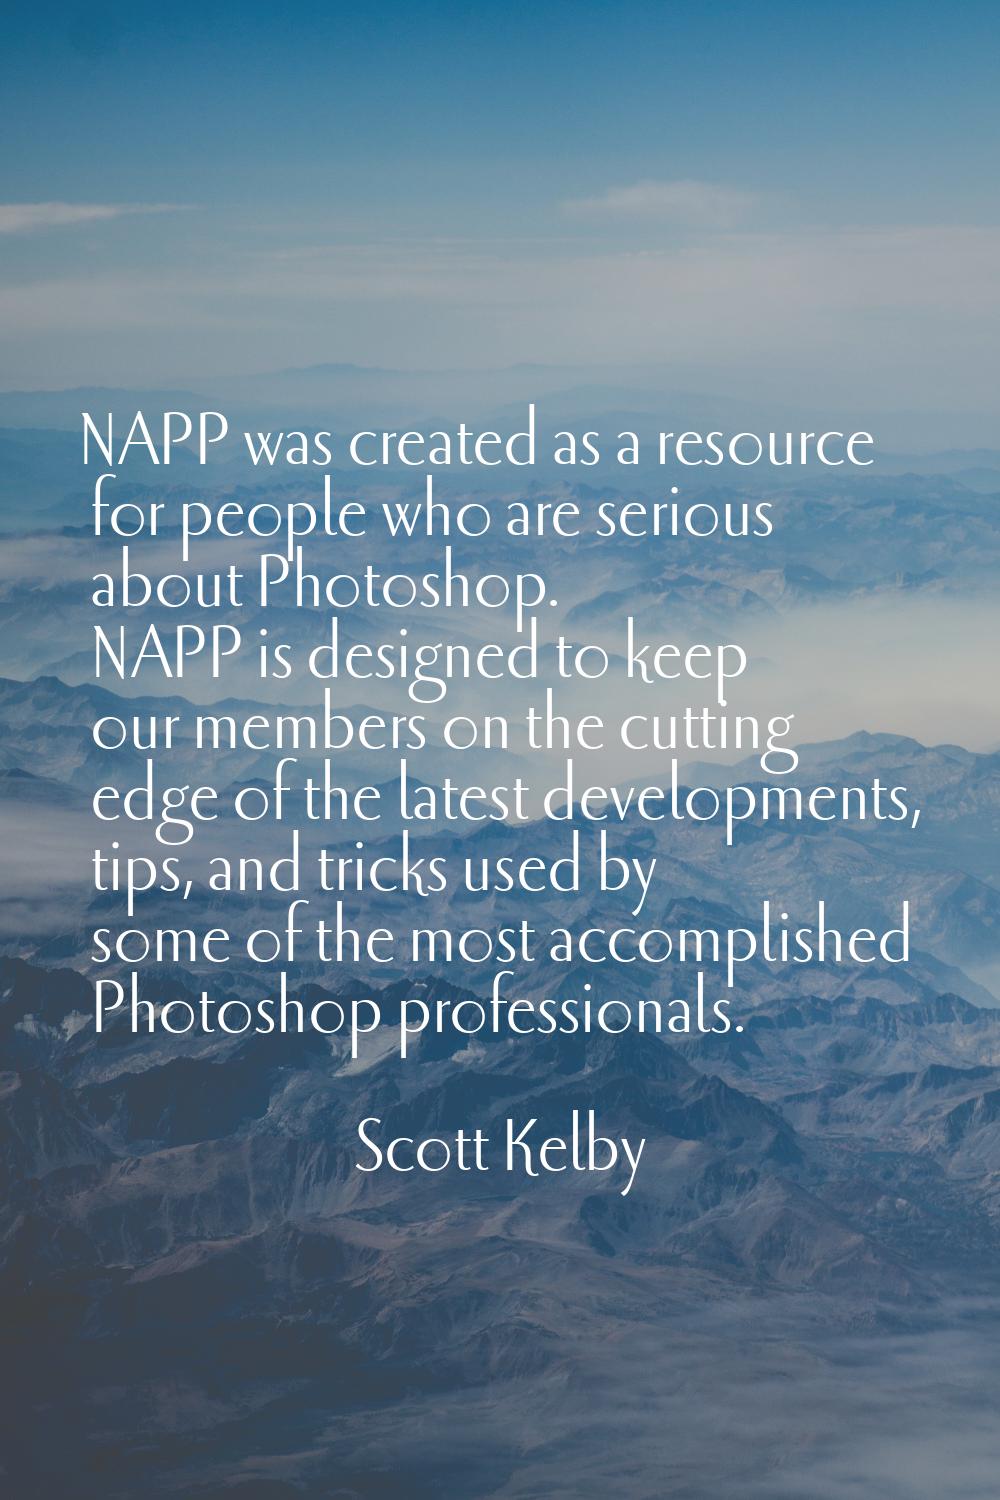 NAPP was created as a resource for people who are serious about Photoshop. NAPP is designed to keep